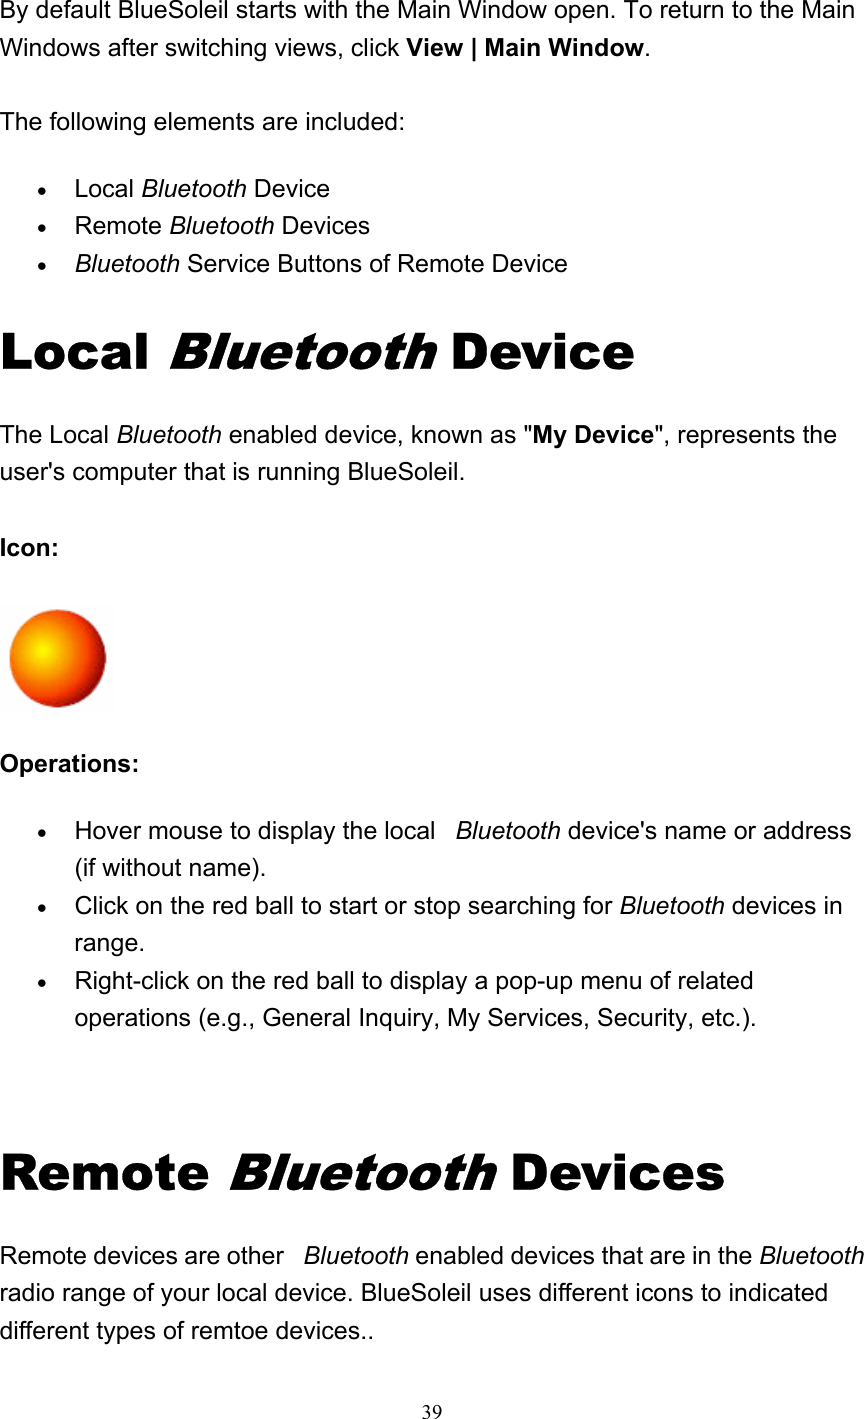   39  By default BlueSoleil starts with the Main Window open. To return to the Main Windows after switching views, click View | Main Window.  The following elements are included: • Local Bluetooth Device   • Remote Bluetooth Devices   • Bluetooth Service Buttons of Remote Device   Local Bluetooth Device The Local Bluetooth enabled device, known as &quot;My Device&quot;, represents the user&apos;s computer that is running BlueSoleil.  Icon:   Operations: • Hover mouse to display the local   Bluetooth device&apos;s name or address (if without name).   • Click on the red ball to start or stop searching for Bluetooth devices in range.  • Right-click on the red ball to display a pop-up menu of related operations (e.g., General Inquiry, My Services, Security, etc.).     Remote Bluetooth Devices Remote devices are other   Bluetooth enabled devices that are in the Bluetooth radio range of your local device. BlueSoleil uses different icons to indicated different types of remtoe devices..   